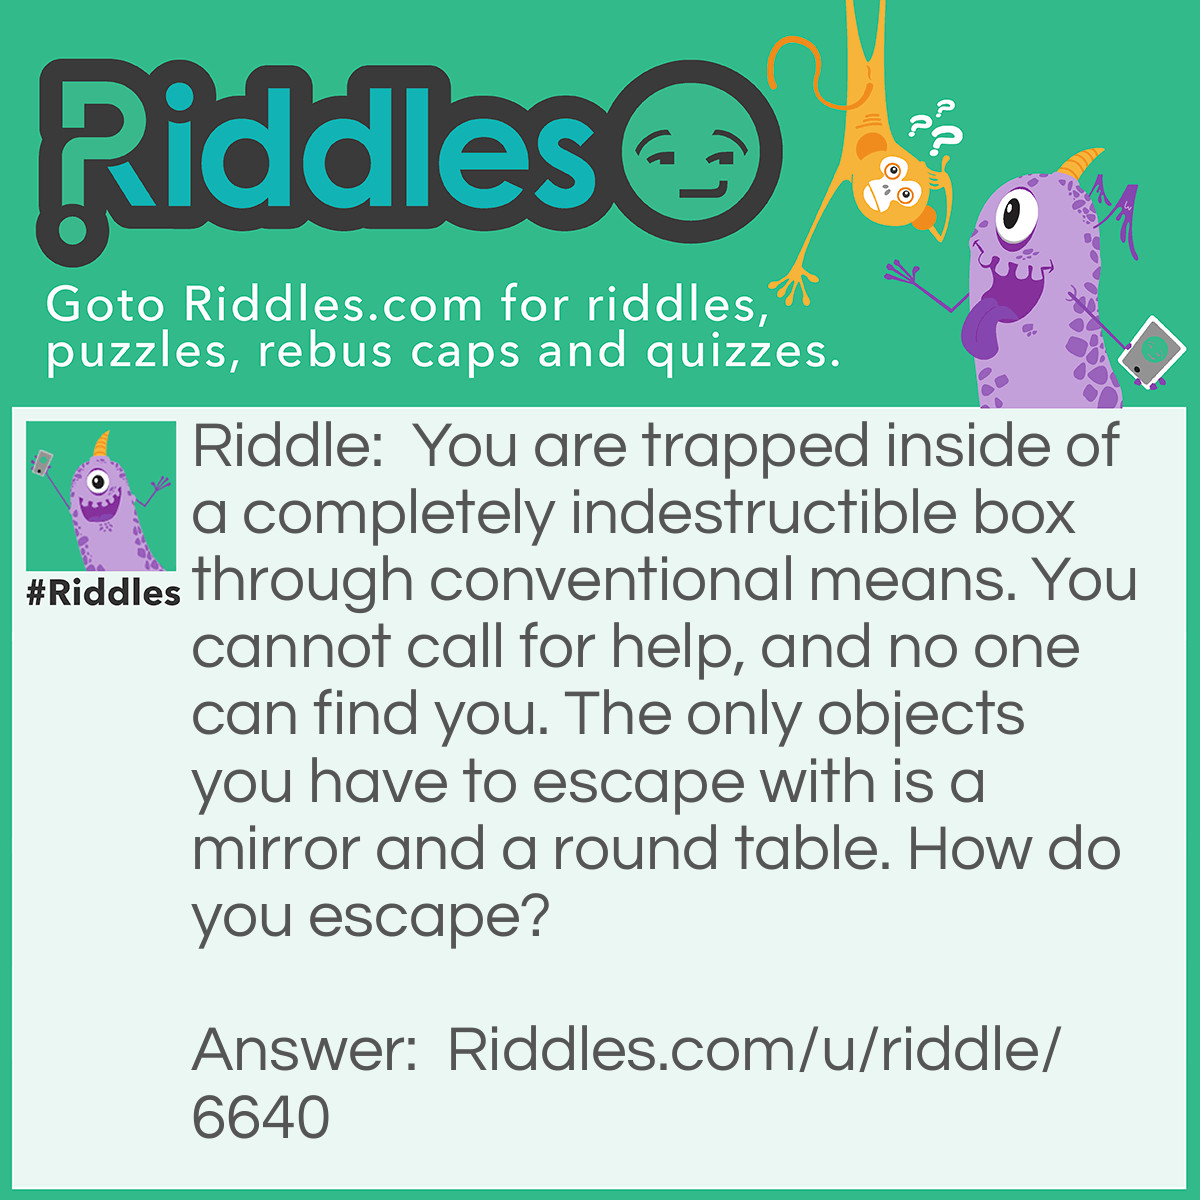 Riddle: You are trapped inside of a completely indestructible box through conventional means. You cannot call for help, and no one can find you. The only objects you have to escape with is a mirror and a round table. How do you escape? Answer: You look in the mirror and see what you saw. You take the saw, saw the table in half. Two halves make a hole, climb through the hole and you are out.